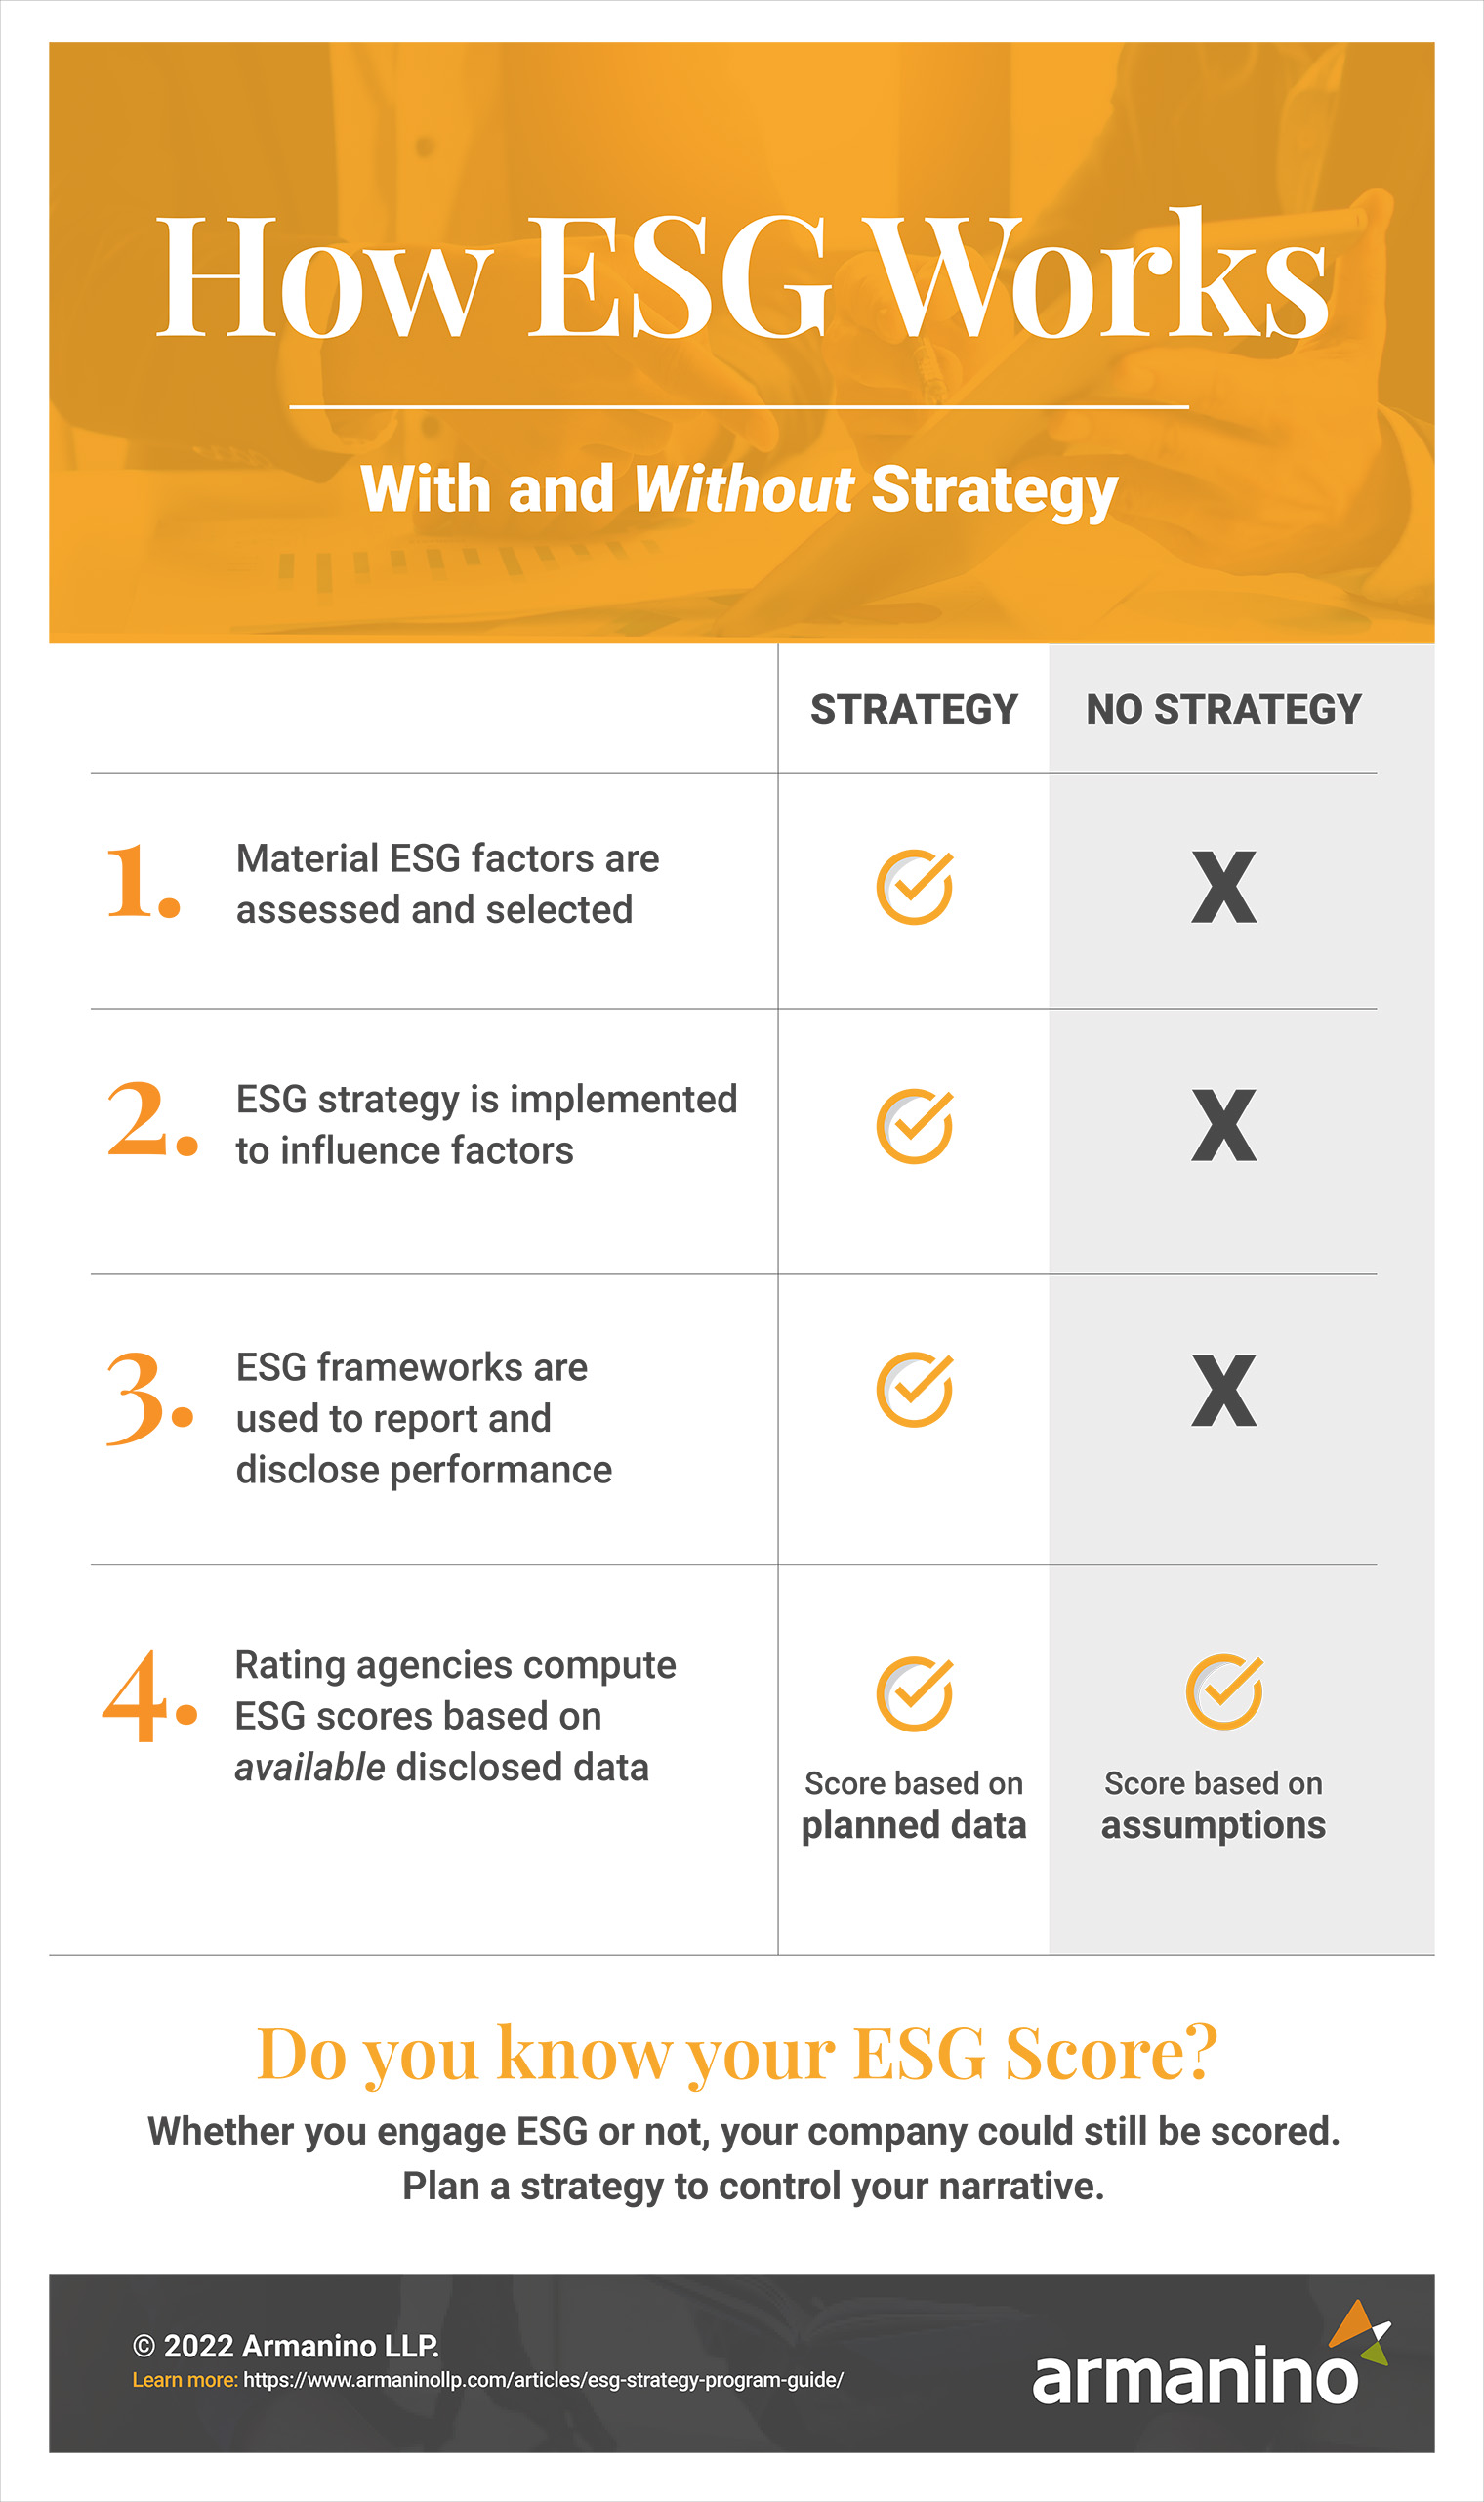 How ESG Works – With or Without Strategy Infographic